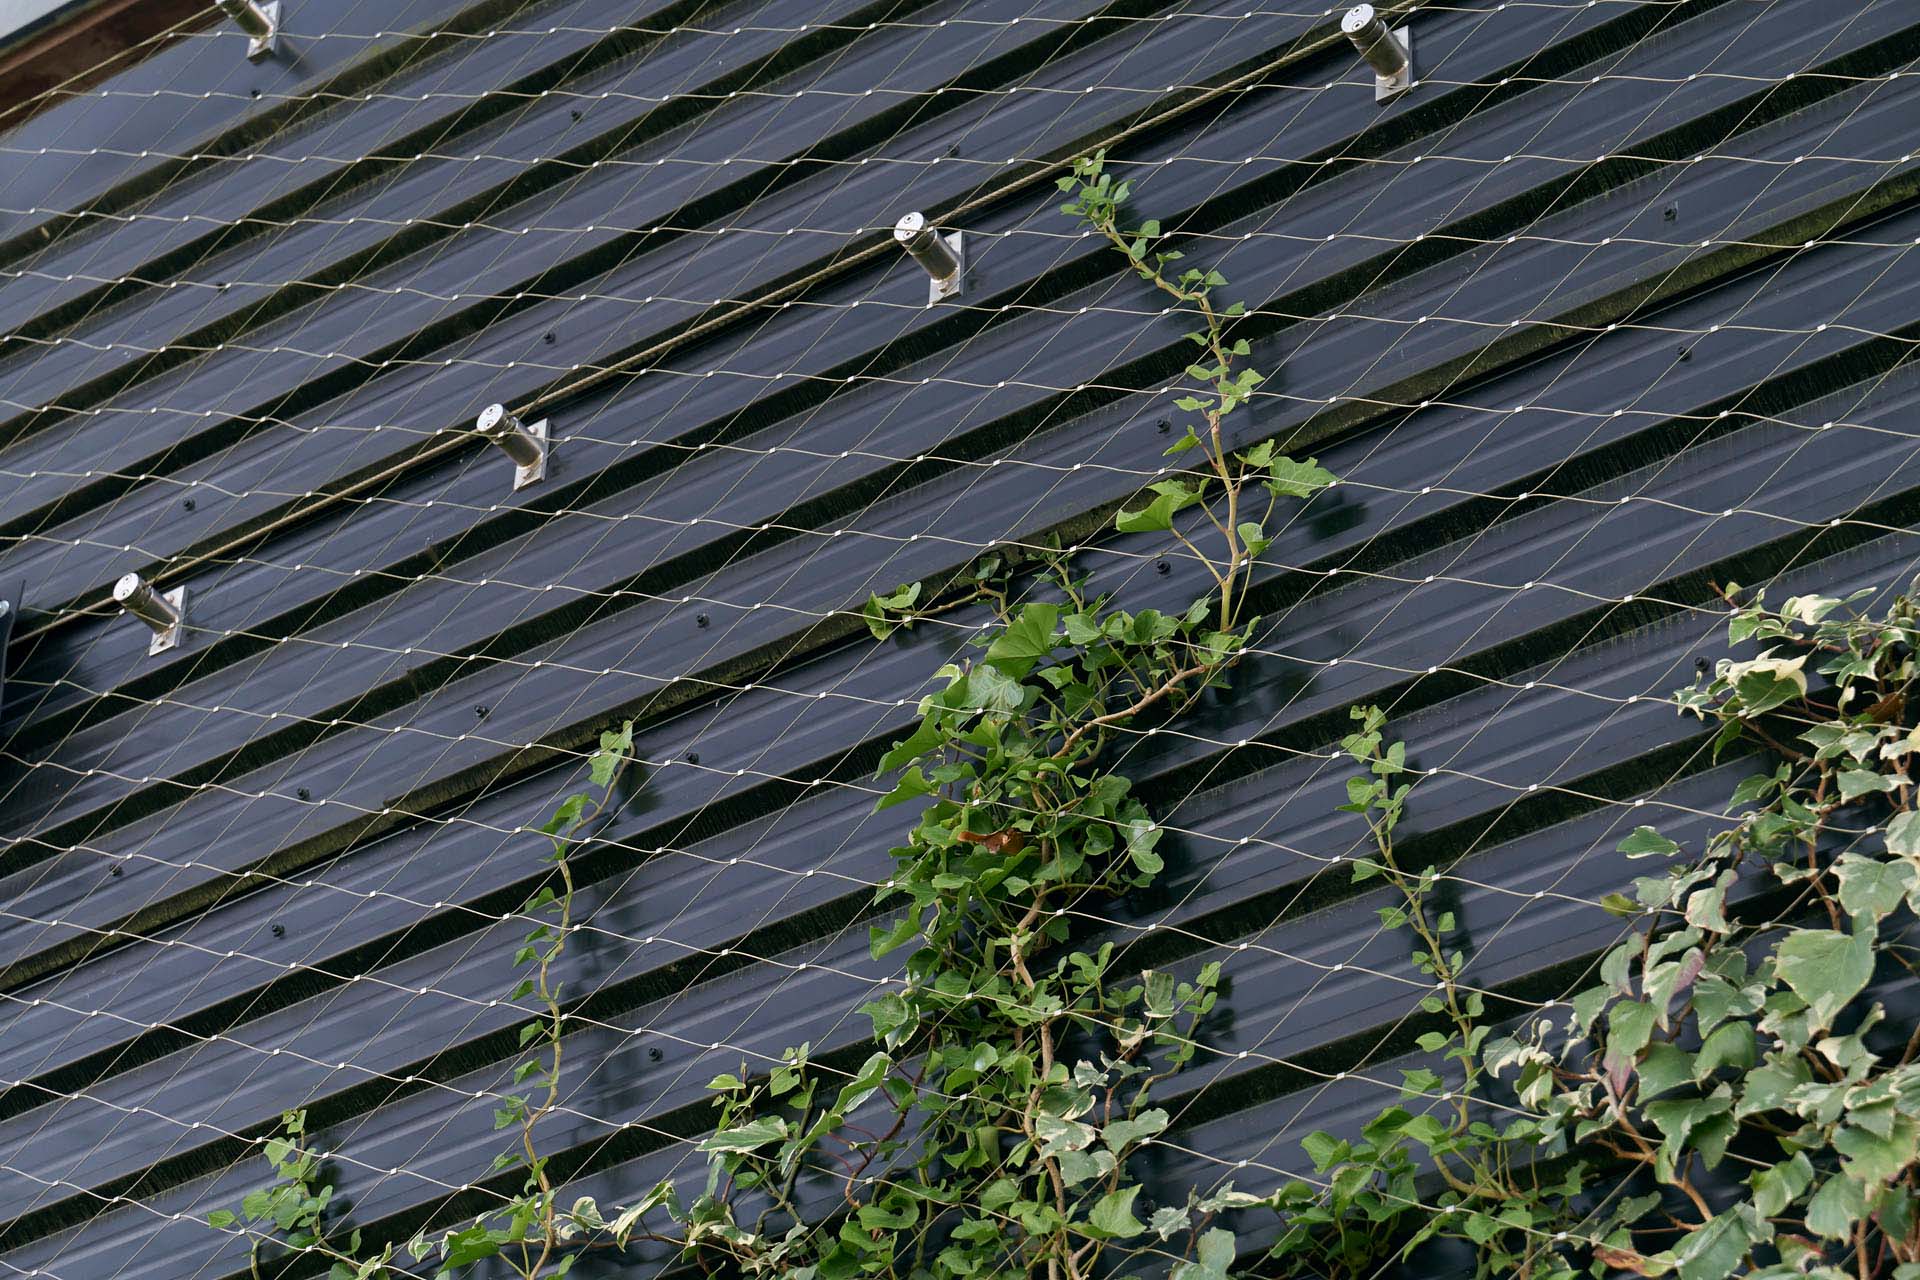 Ivy growing on a facade with a support structure of steel cables